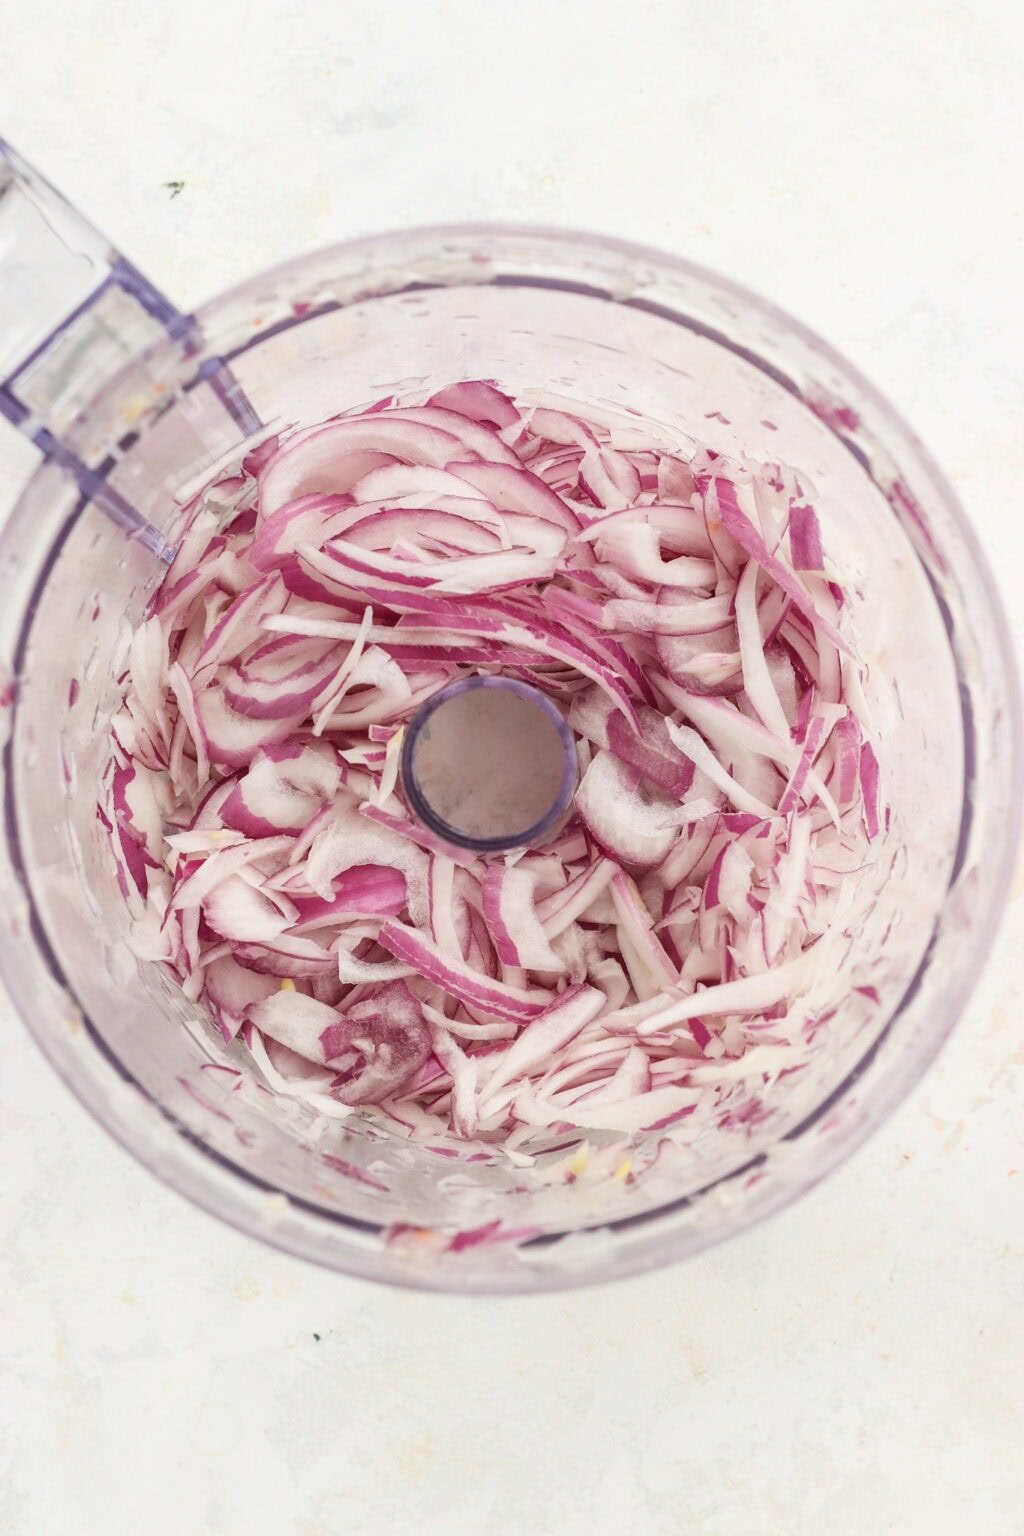 Shredded red onions in a food processor